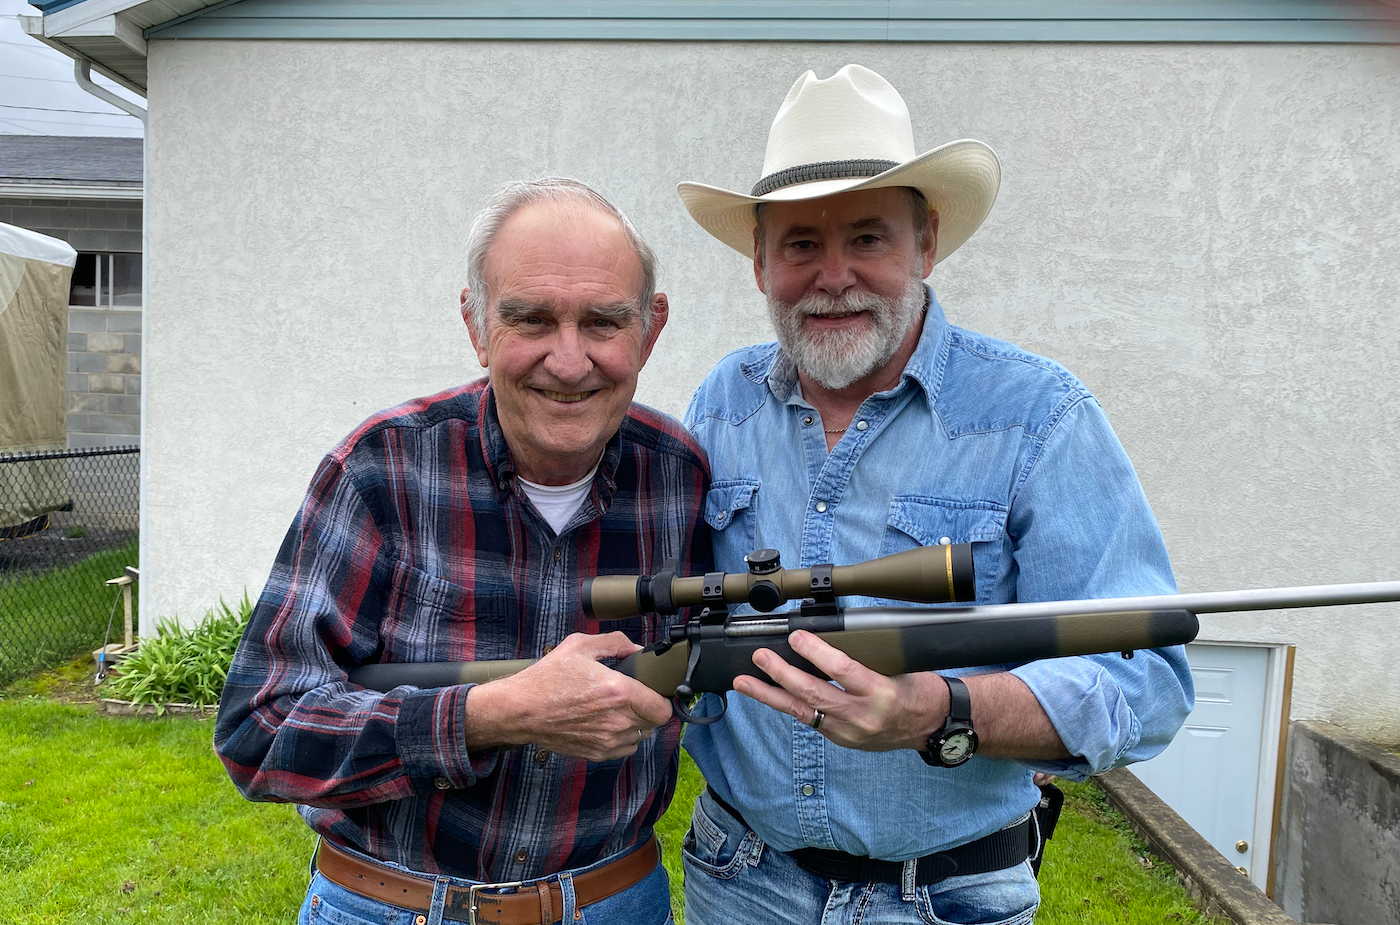 Two men standing in a yard holding a bolt-action rifle.